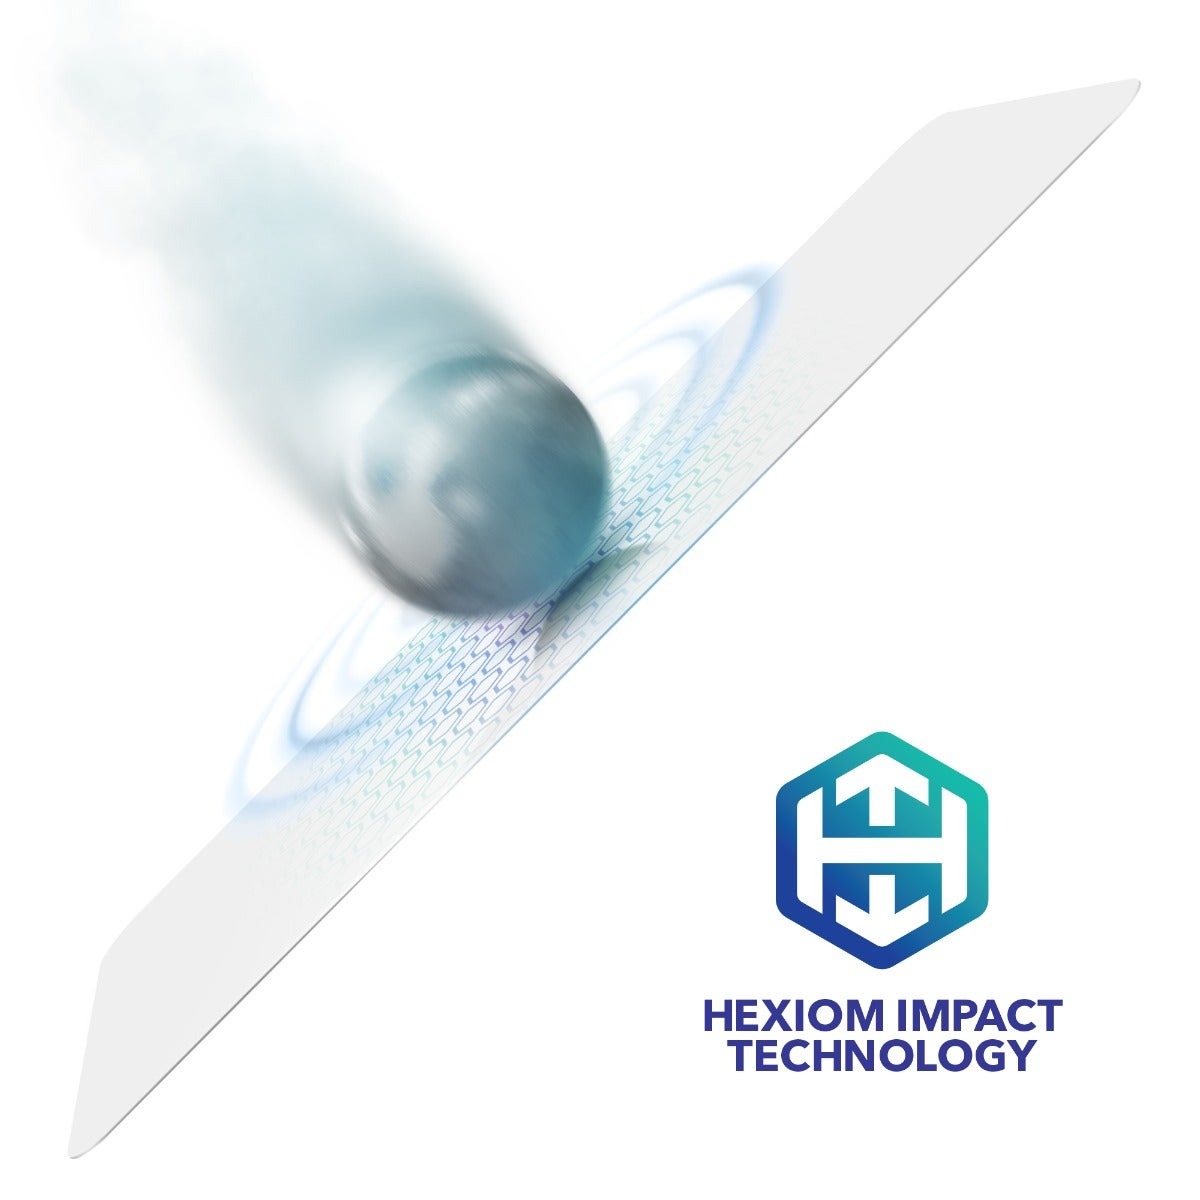 Strongest Impact Protection ||
Shock-absorbing Hexiom impact technology makes Glass XTR3 10x stronger than traditional glass screen protection.